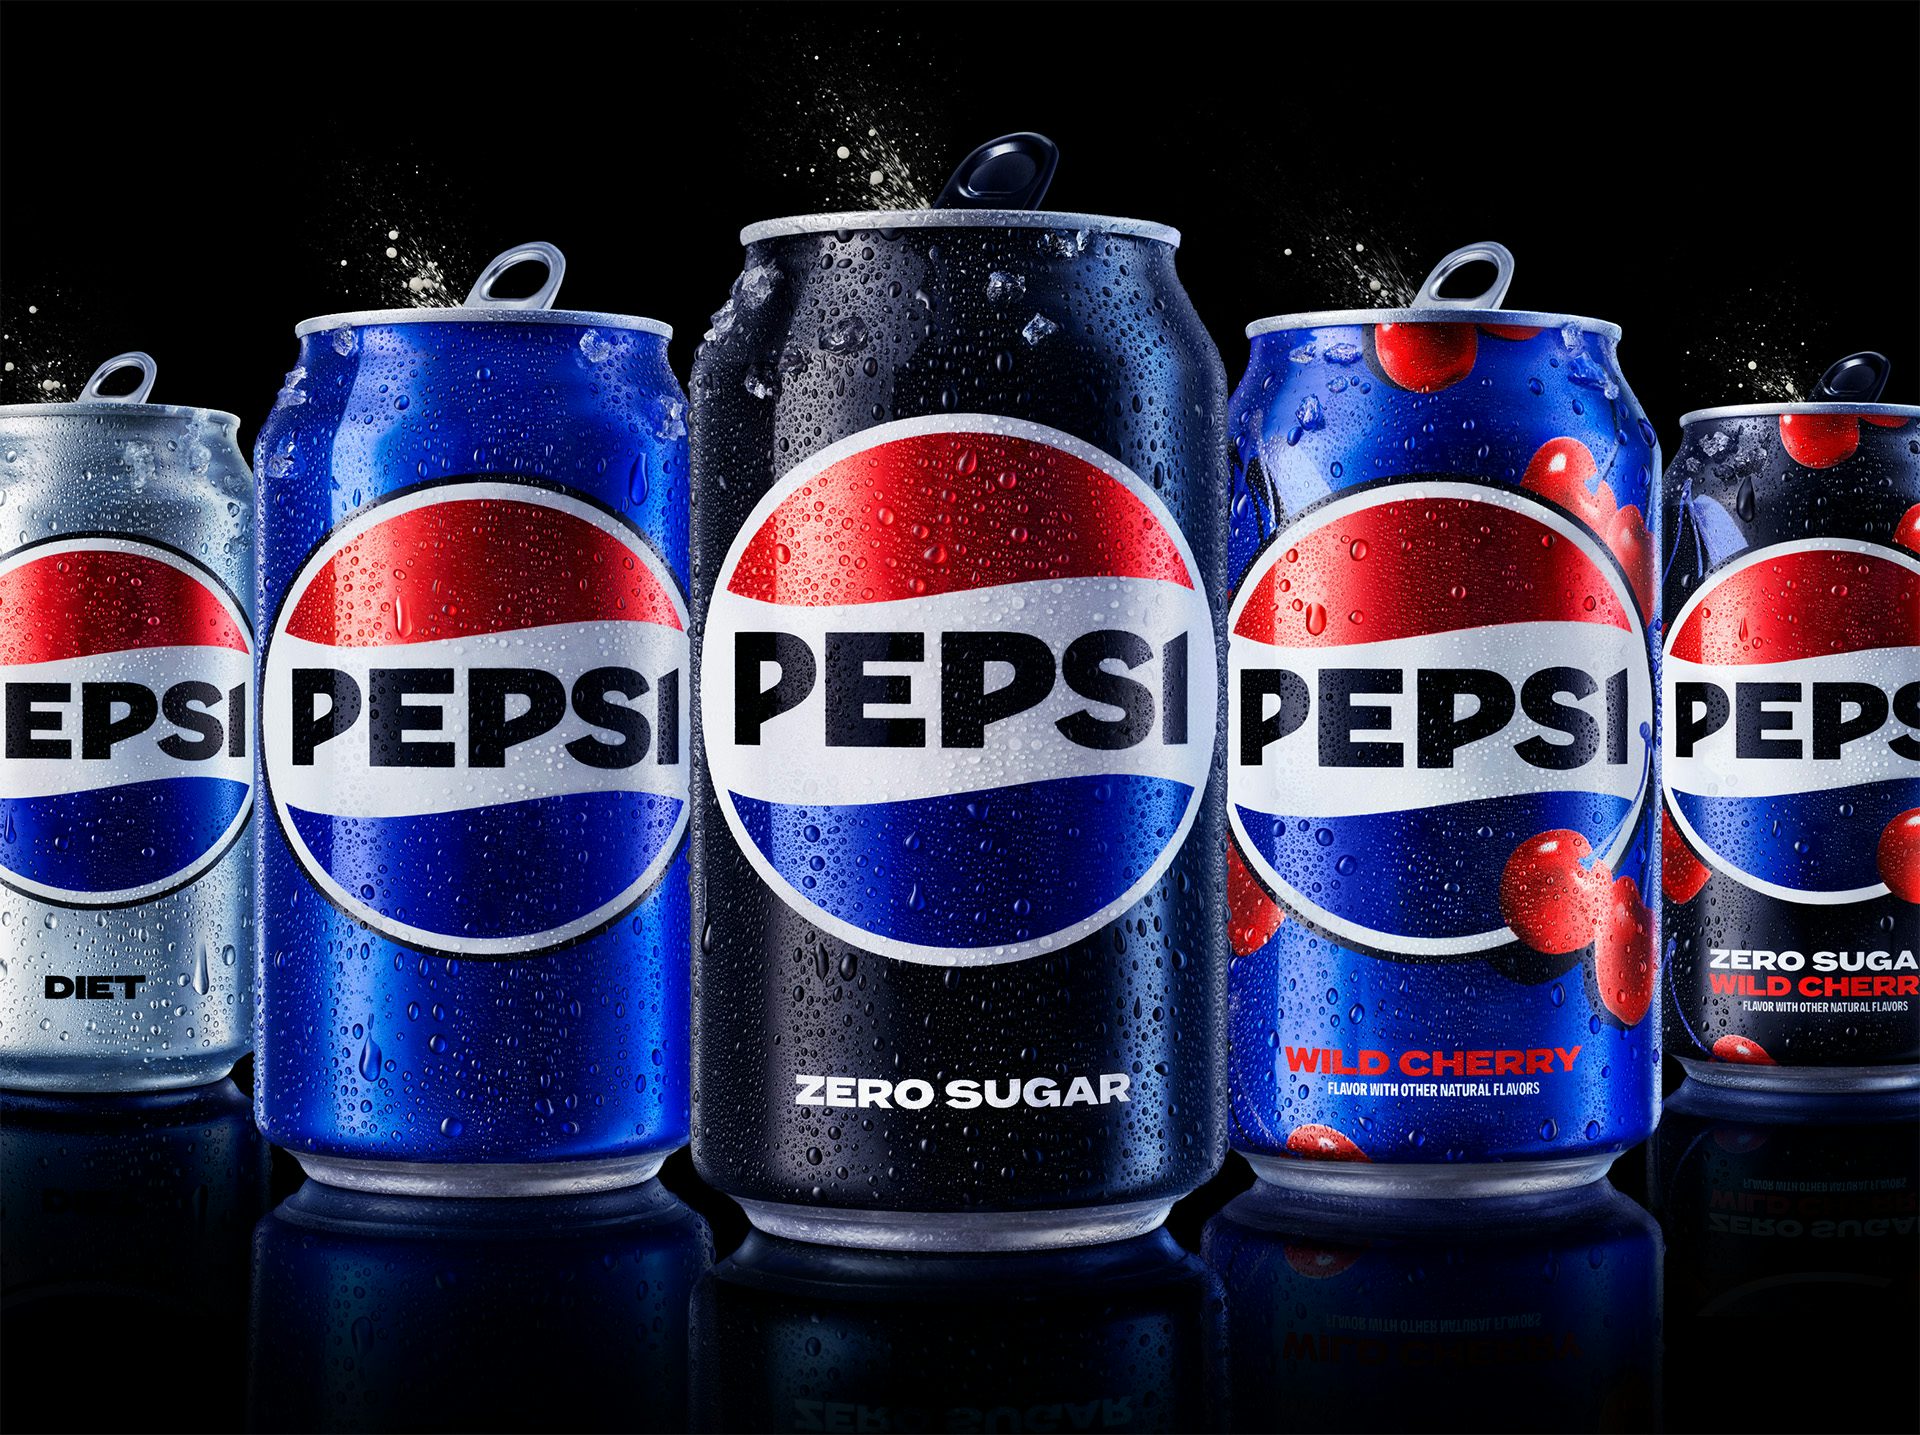 Graphic shows the new Pepsi branding on the brand's five different cans